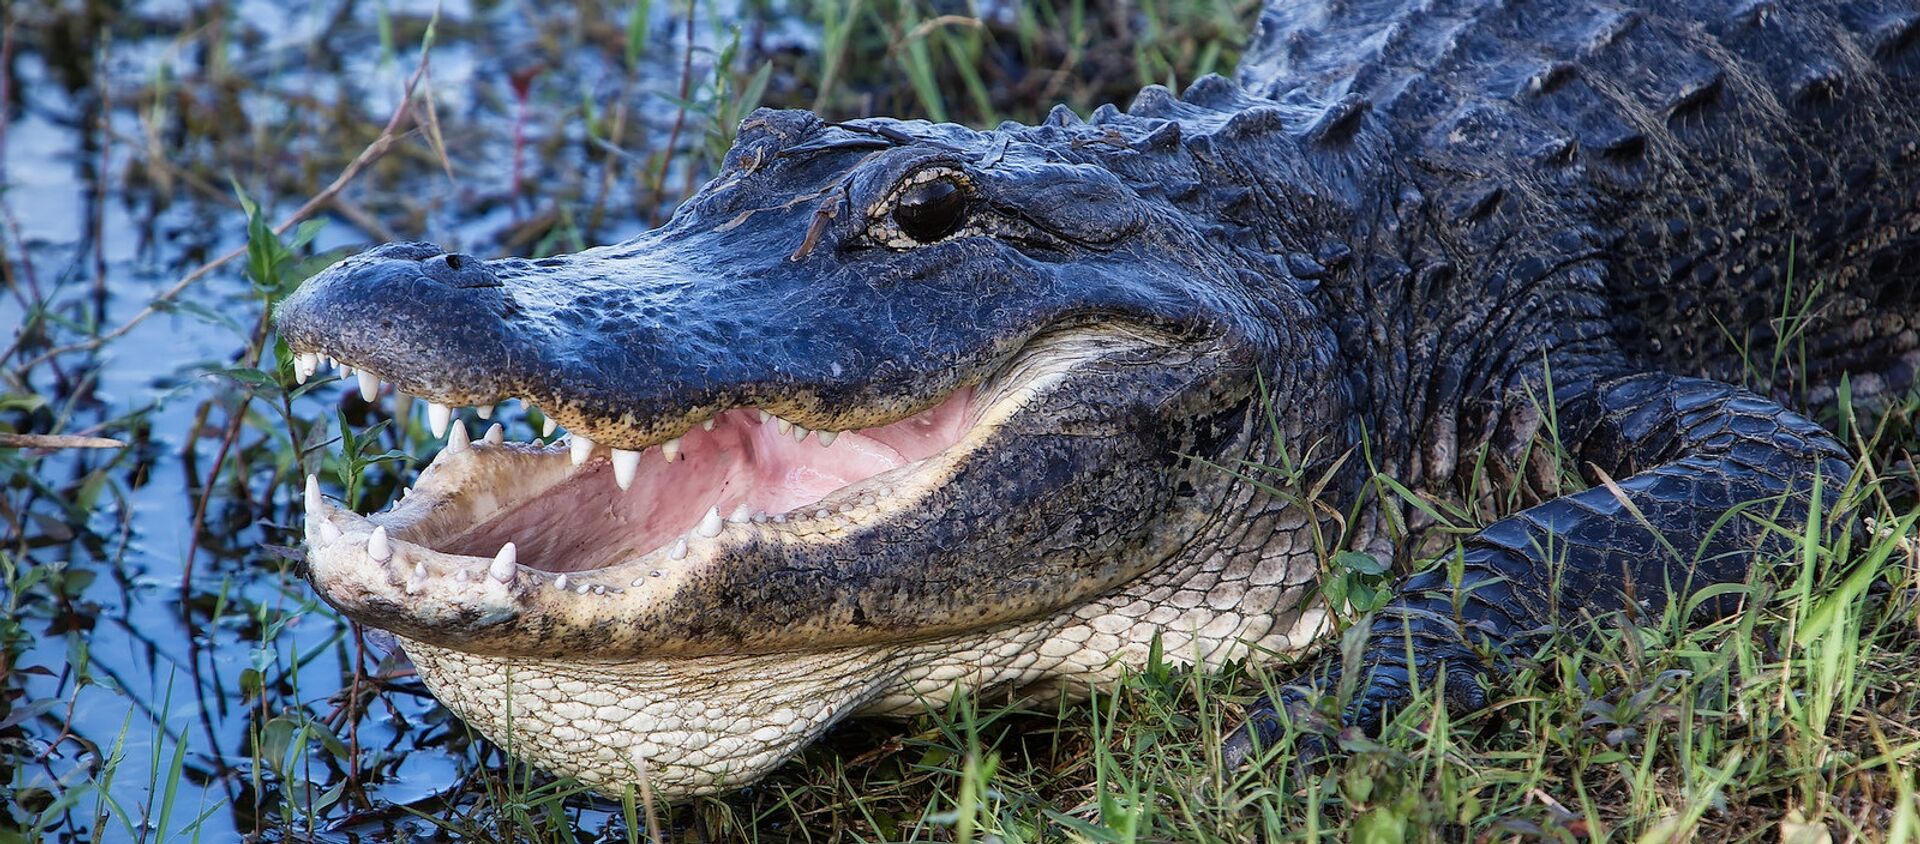 8-Foot Alligator Found in Florida With Man's Body in Its Mouth - Sputnik International, 1920, 10.07.2021